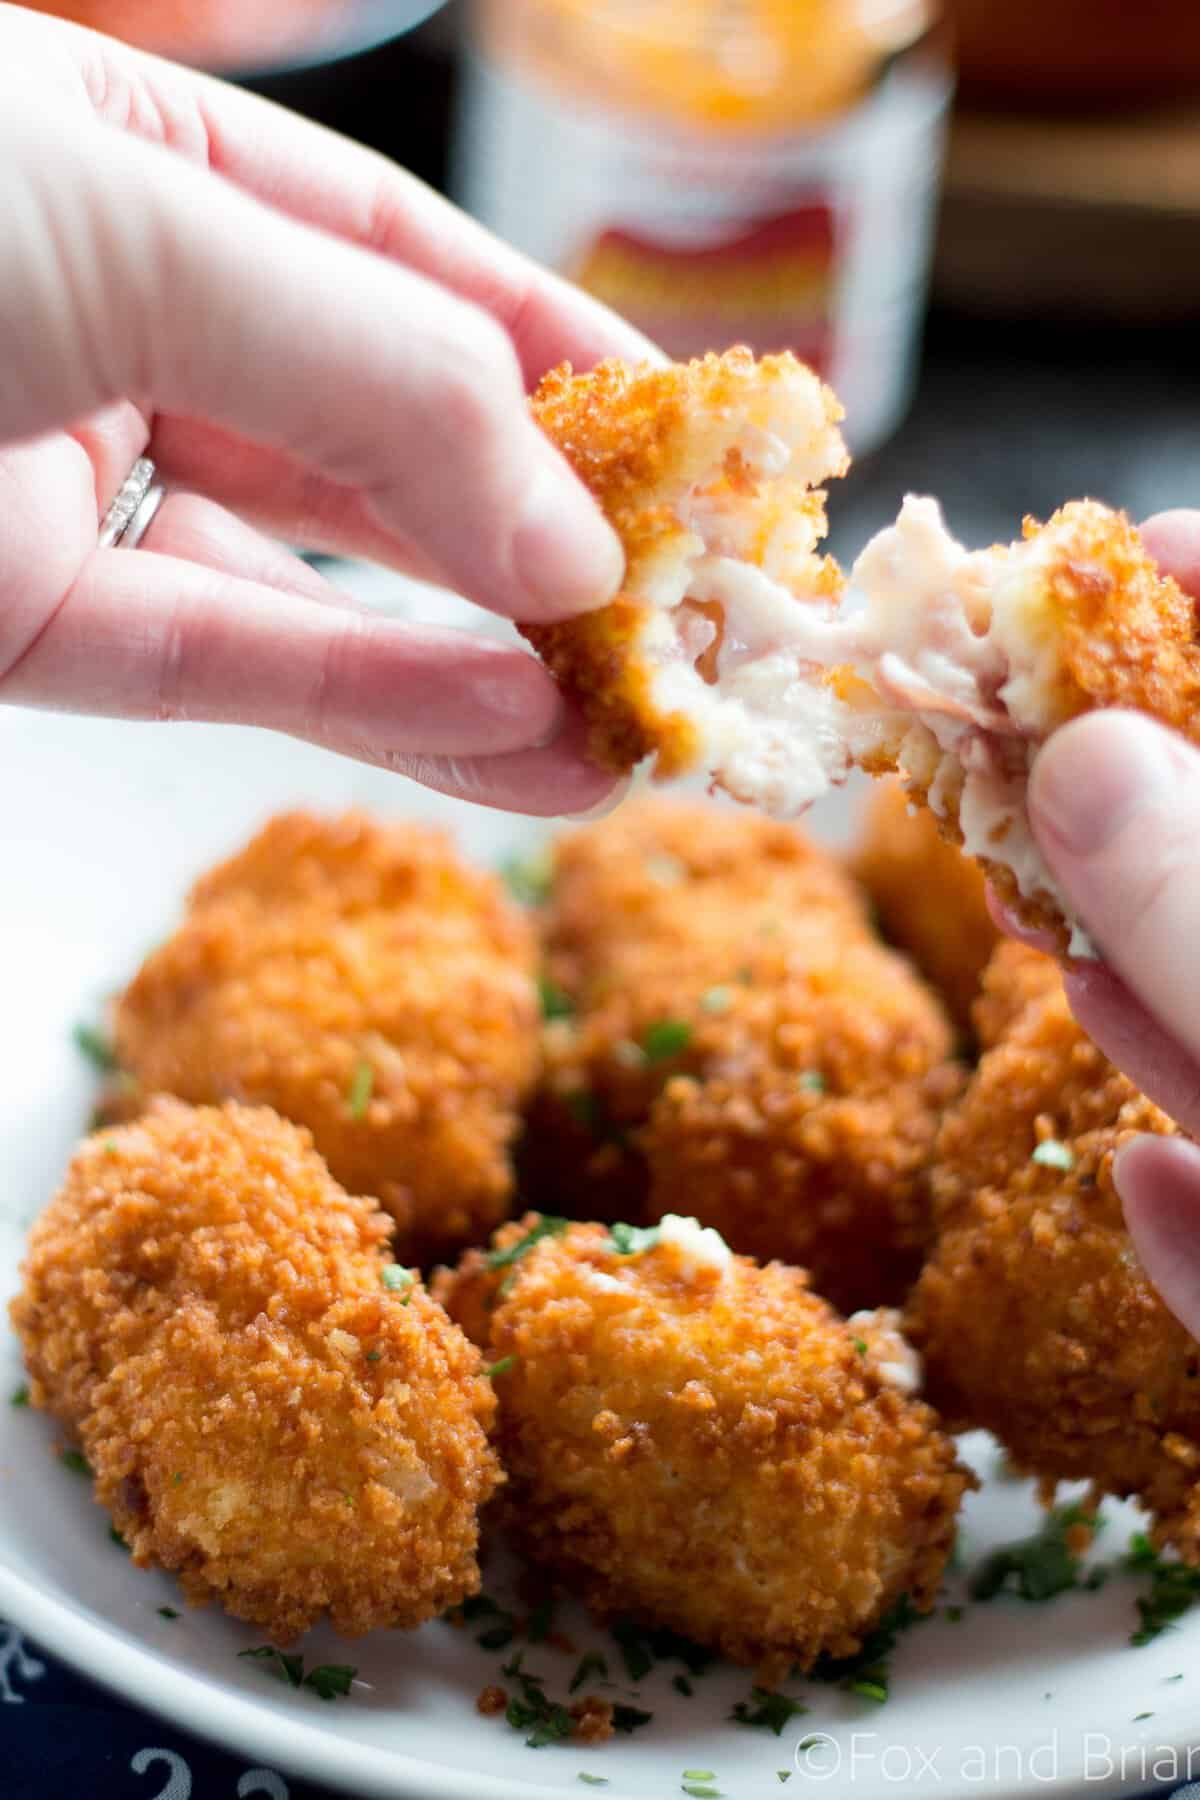 Ham Croquettes (Croquetas de Jamon) are a classic Spanish tapas dish. Crispy on the outside and creamy on the inside, these little flavor bombs will knock your socks off.